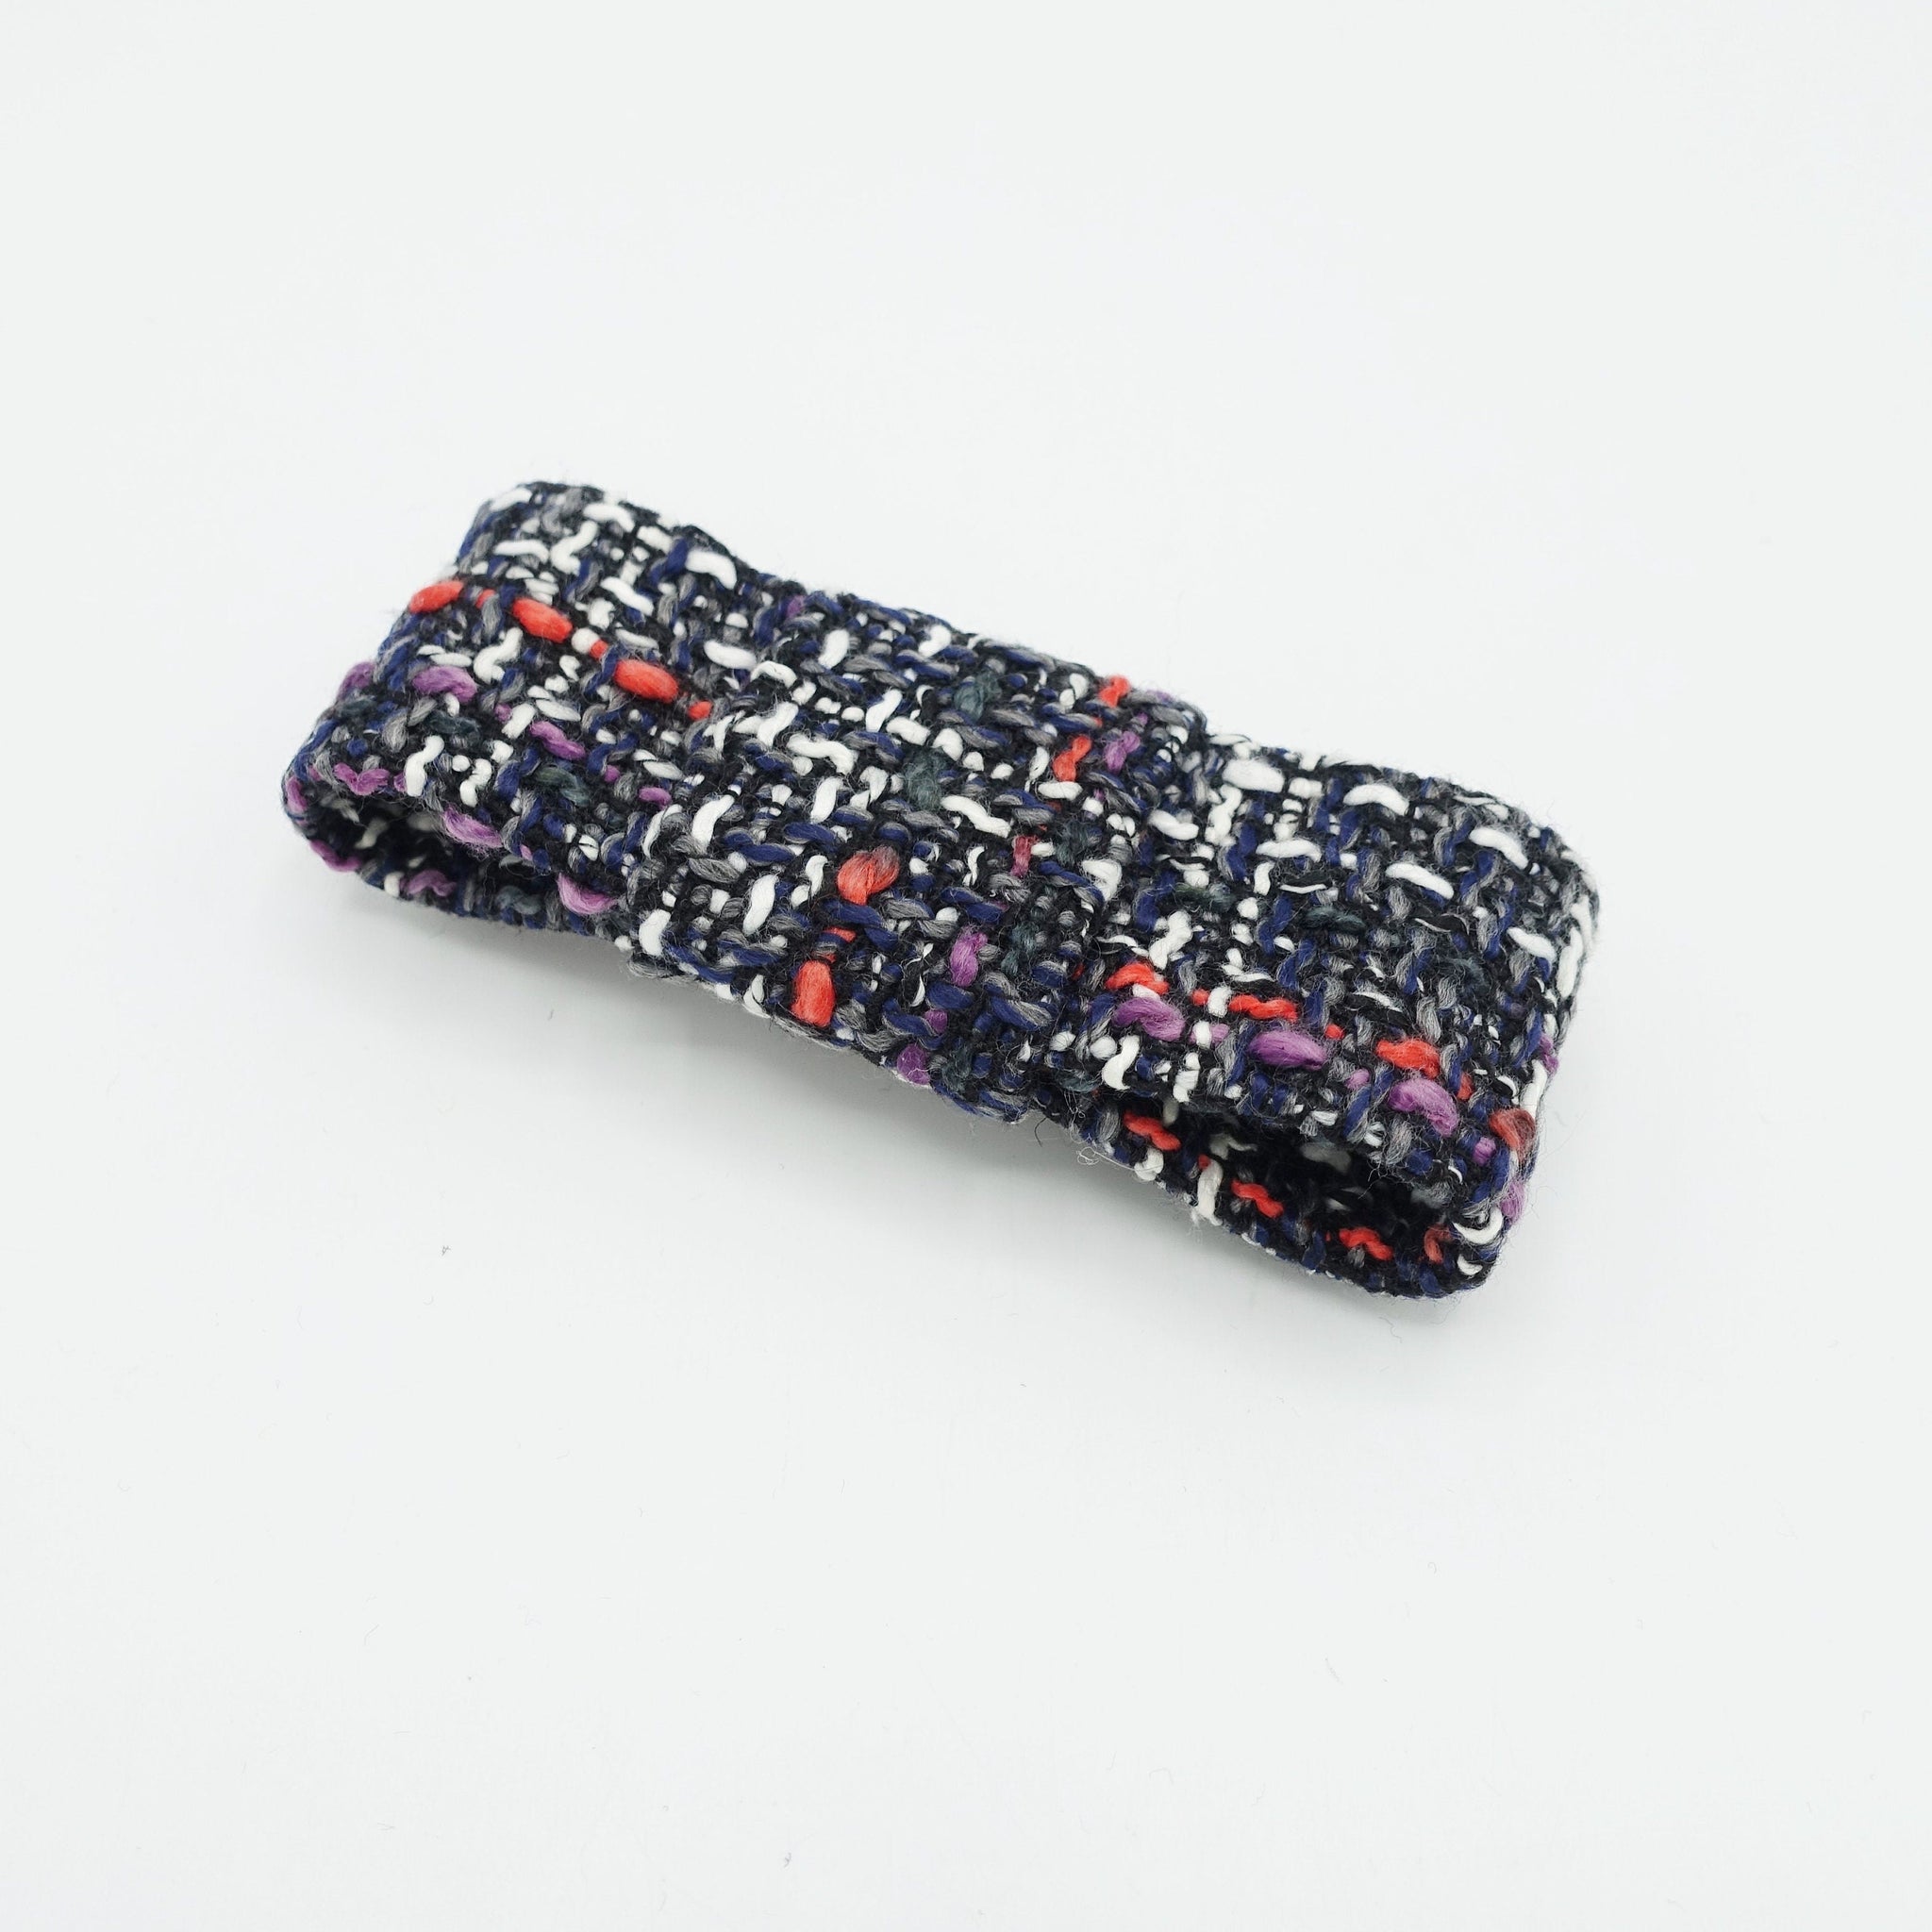 veryshine.com Barrette (Bow) Purple tweed hair bow flat style french barrette Autumn Winter hair accessory for women